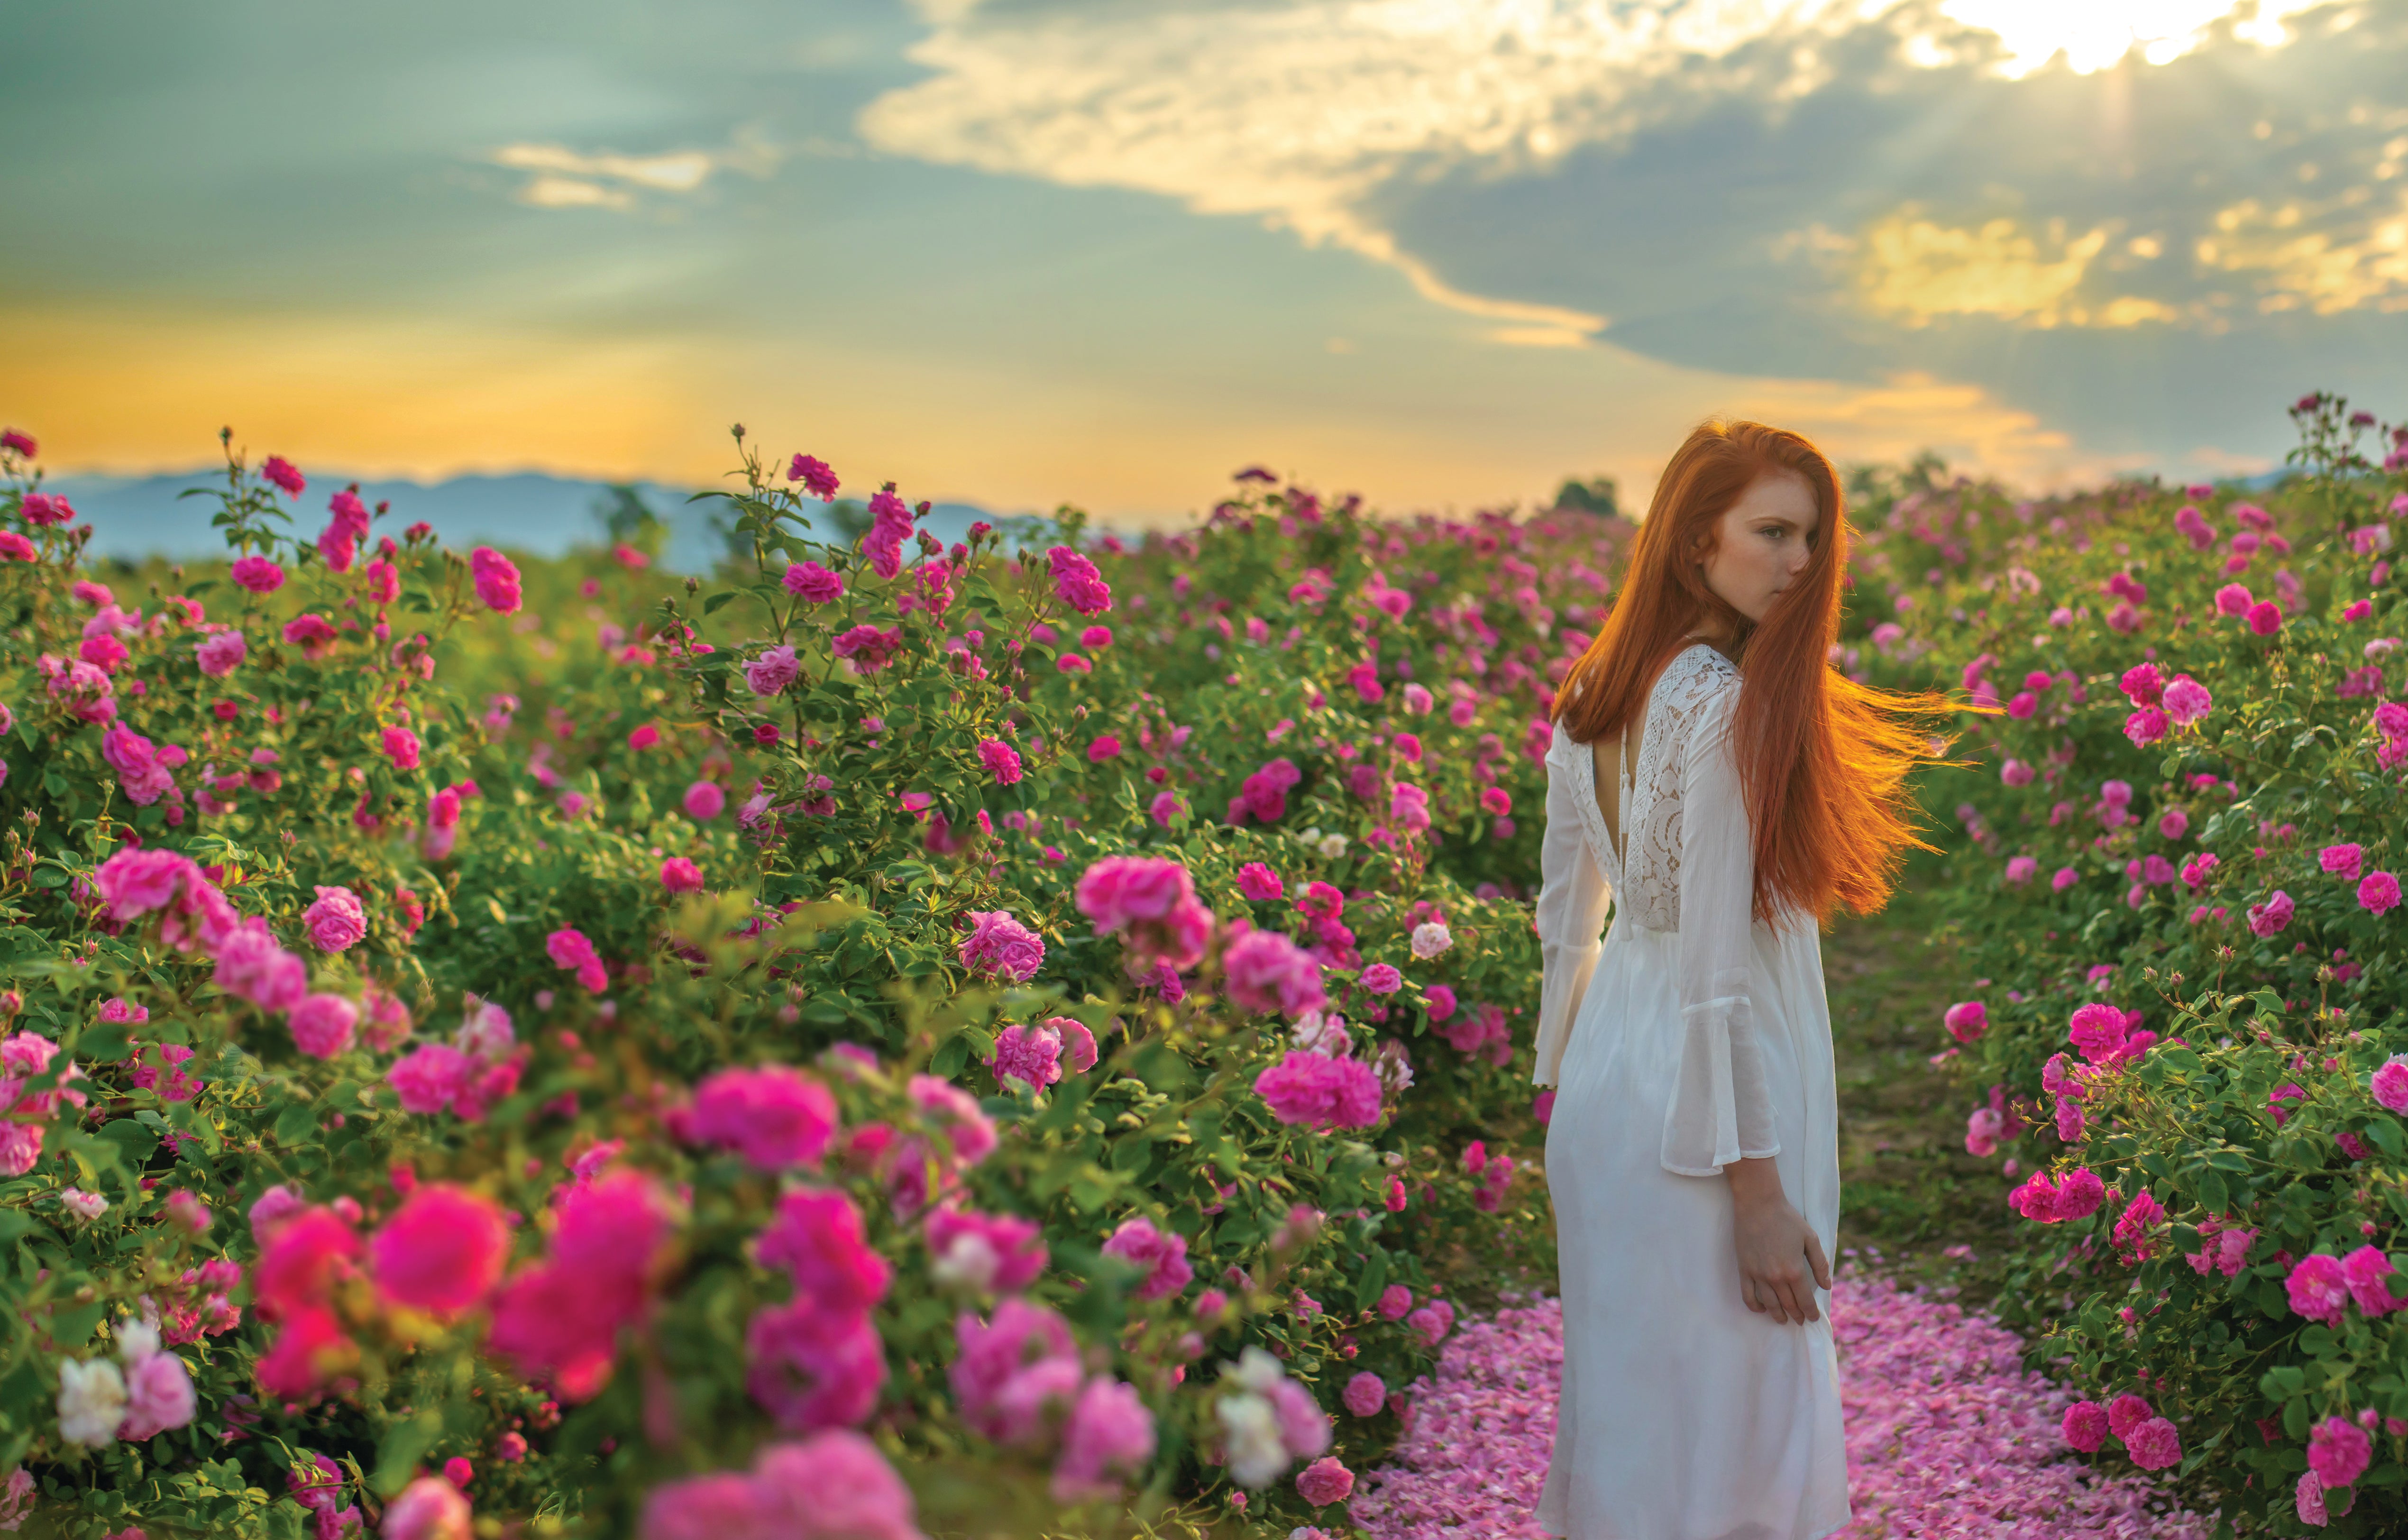 A woman in a white dress standing in a field of roses.